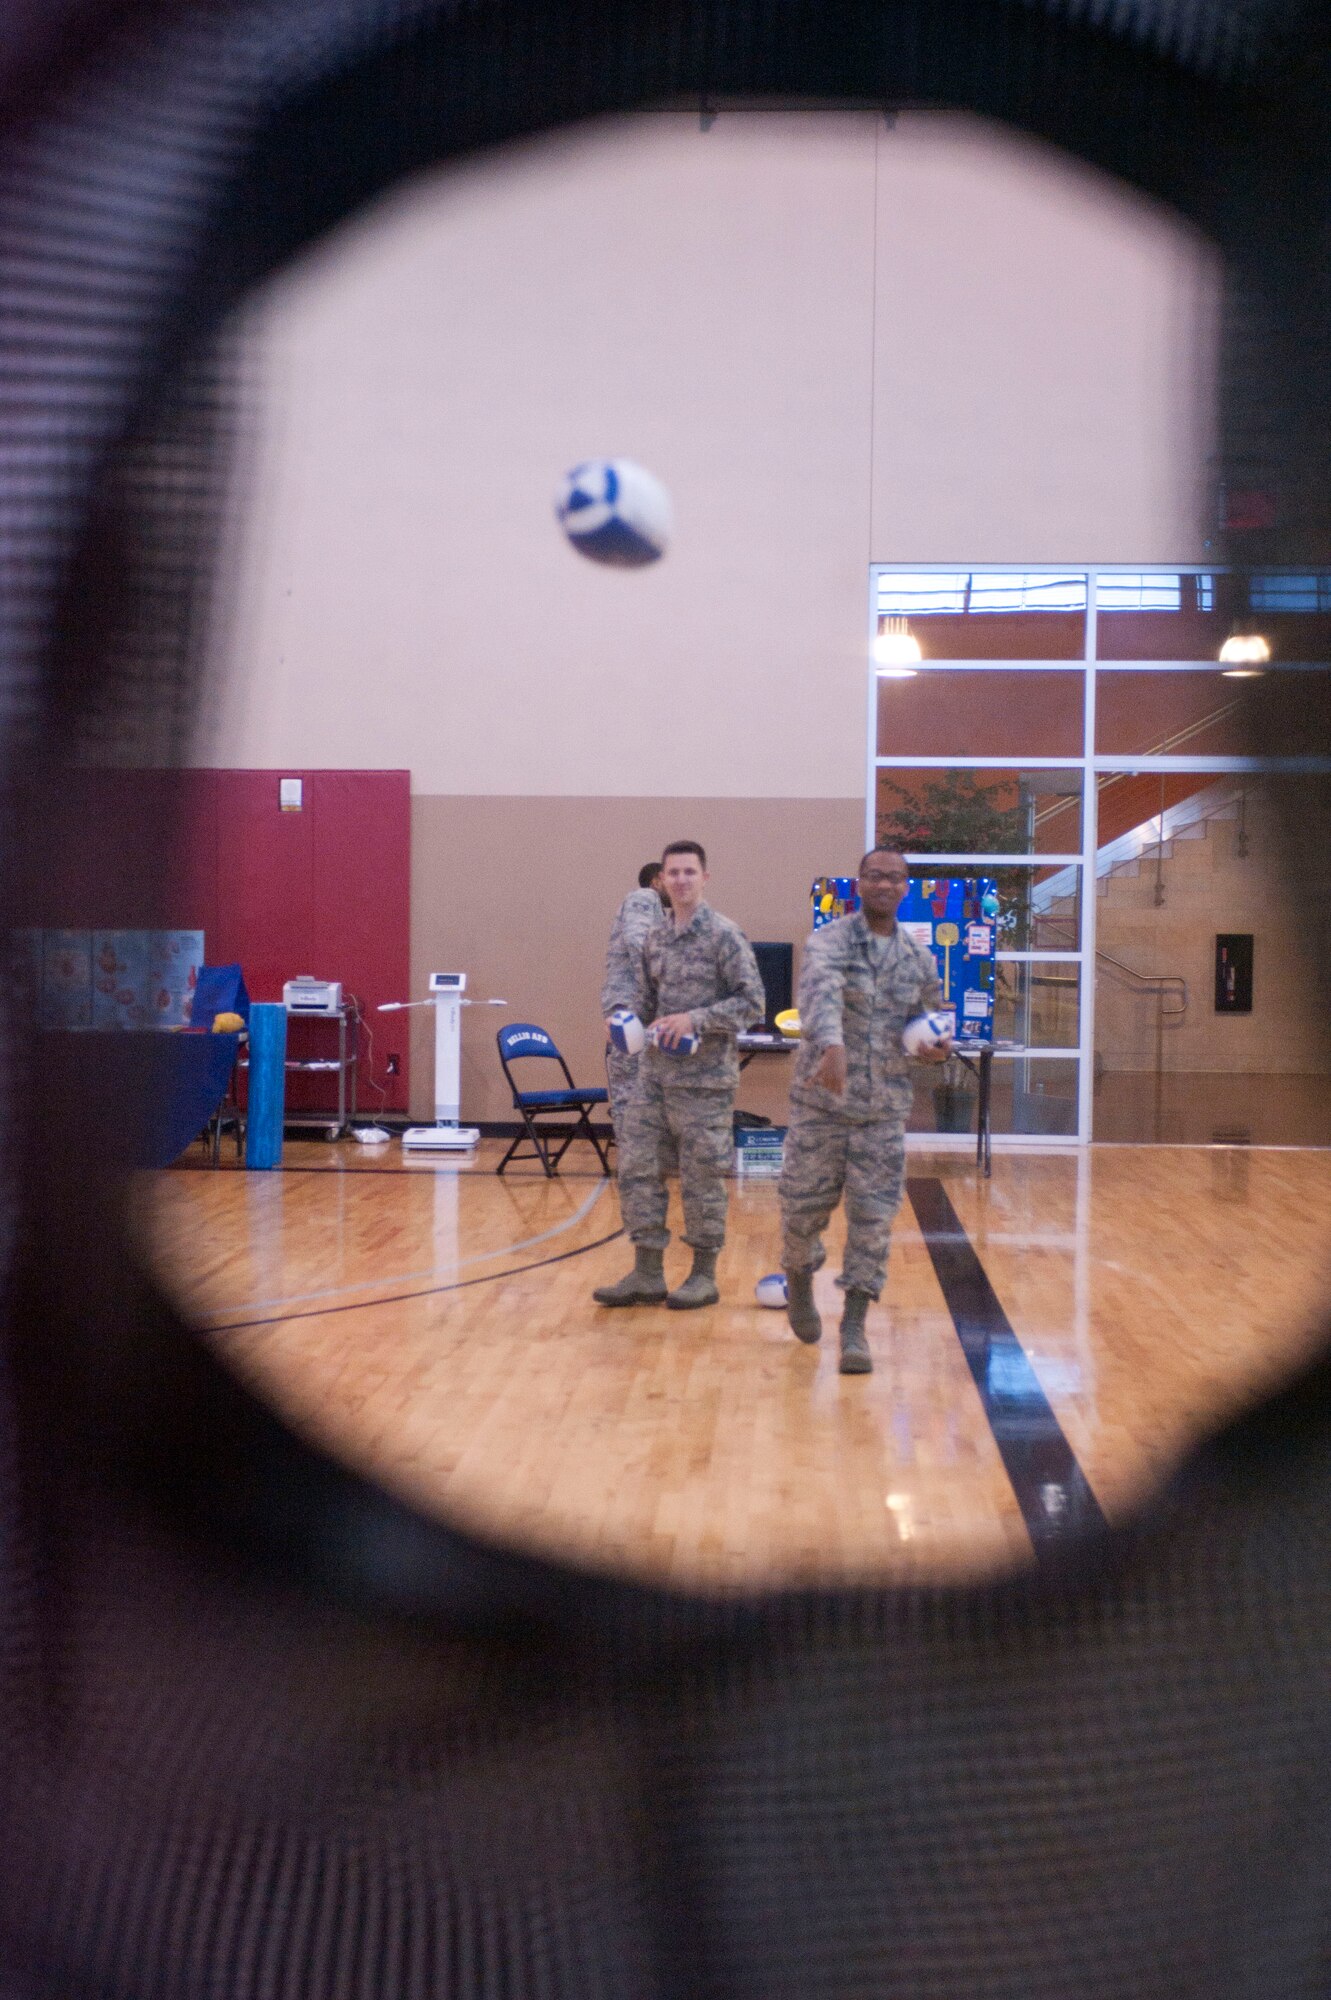 Capt. (Dr.) Wade Hinrichs (left) and Capt. (Dr.) Terrell Mitchell (right), 99th Dental Squadron dentists, take turns throwing indoor footballs at pockets on a standup simulating football receivers open for a catch during a Health Fair May 30, 2014 at Nellis Air Force Base, Nev.  One of the fitness center's goals during the health fair was to be a conduit for fitness information. (U.S. Air Force photo by Senior Airman Timothy Young)